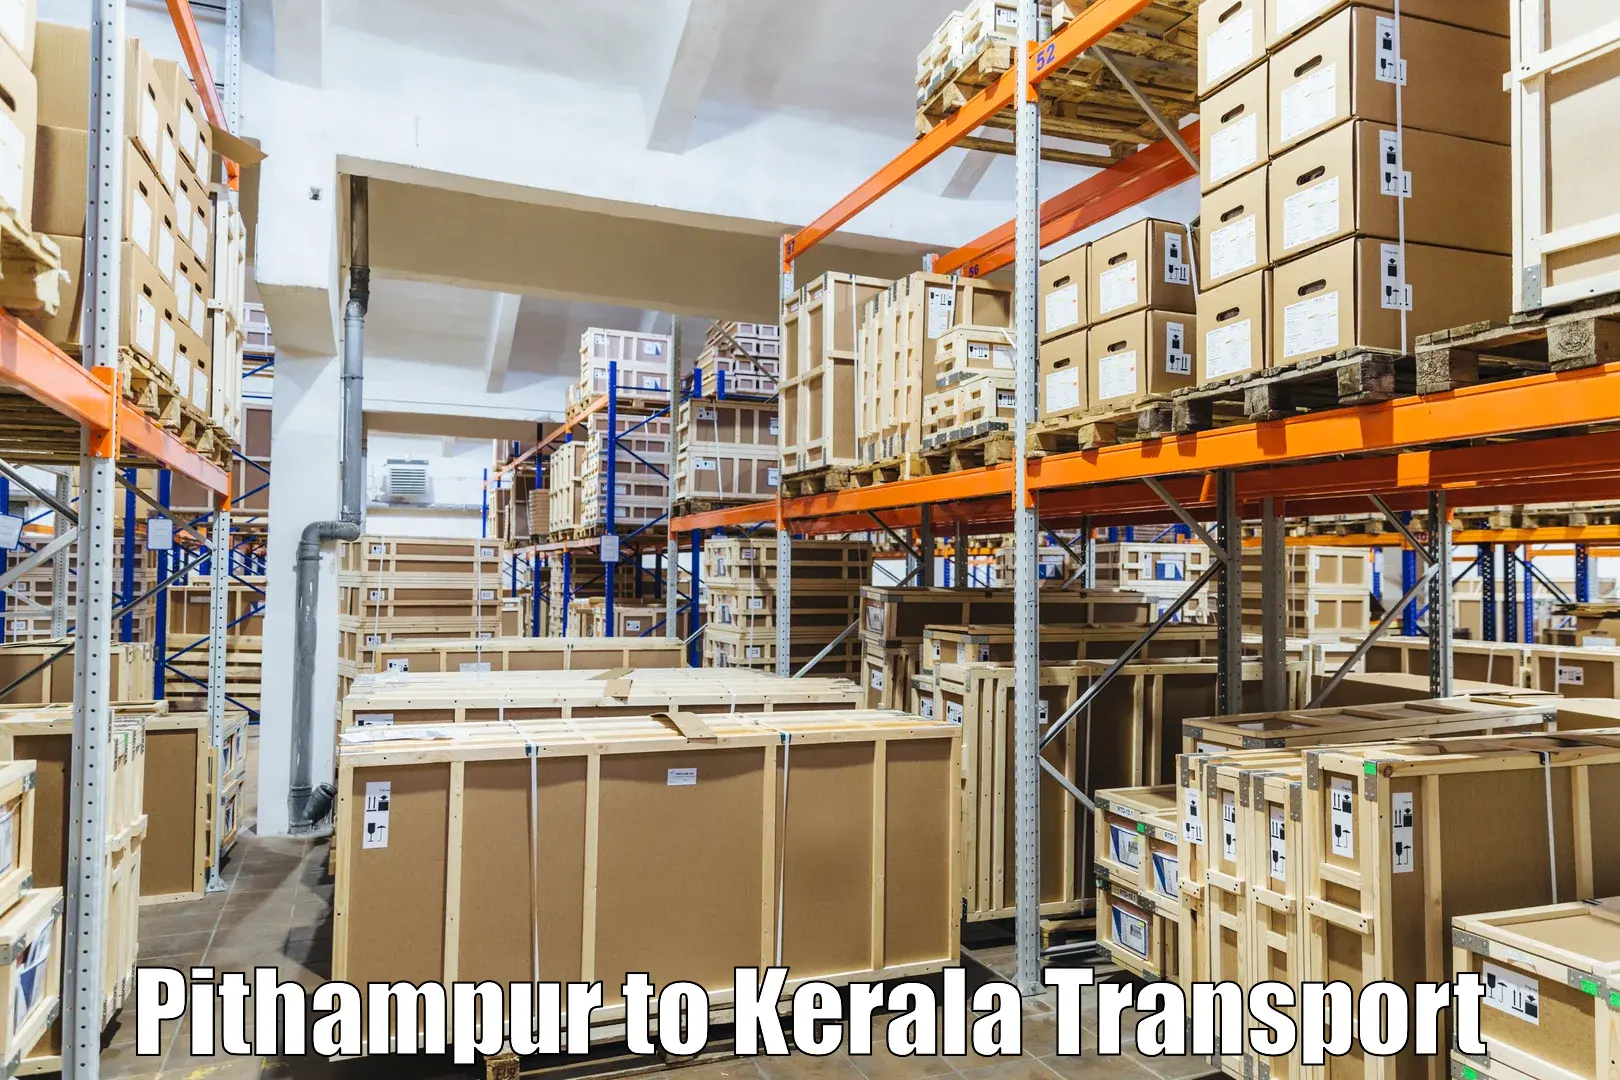 Truck transport companies in India Pithampur to Kerala